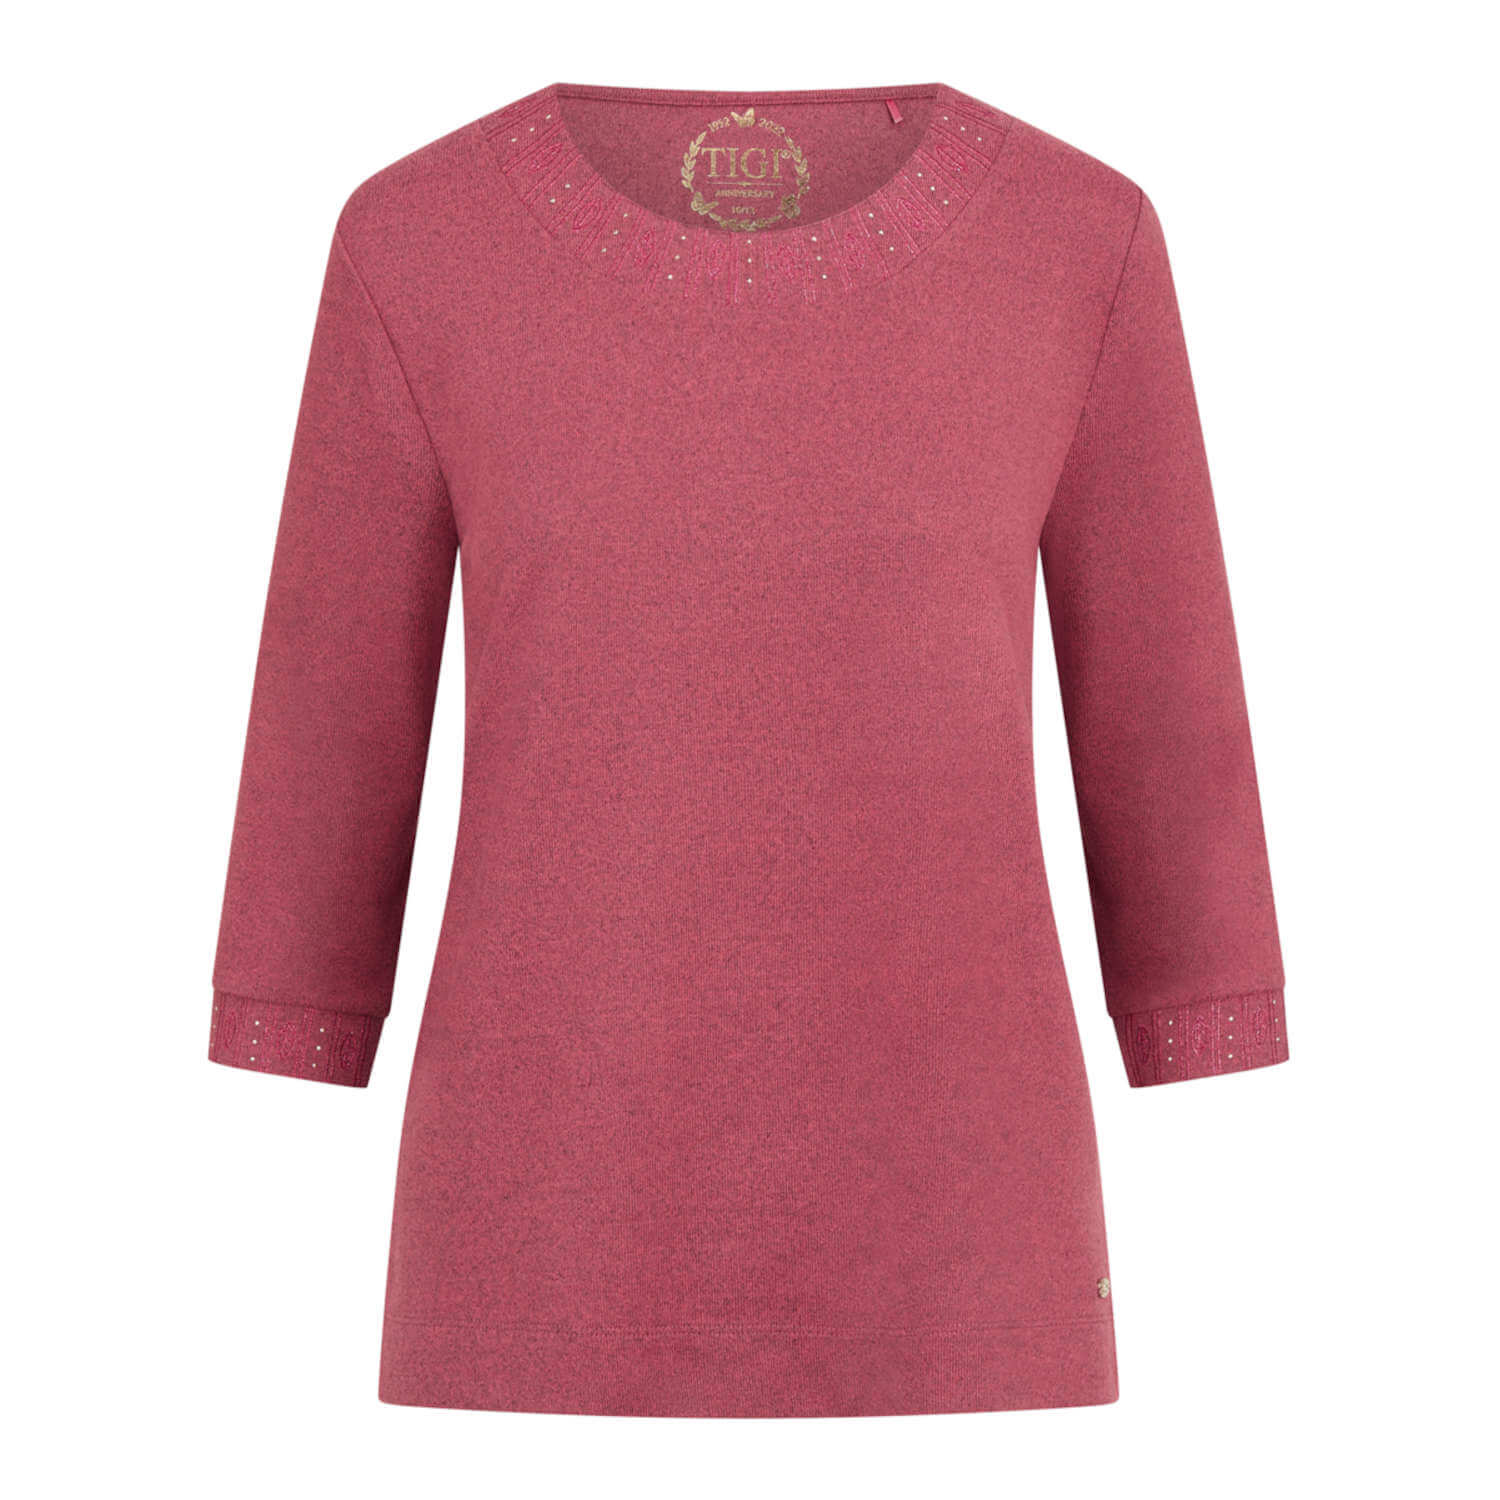 Tigiwear Embellished Neck Top - Peony 6 Shaws Department Stores